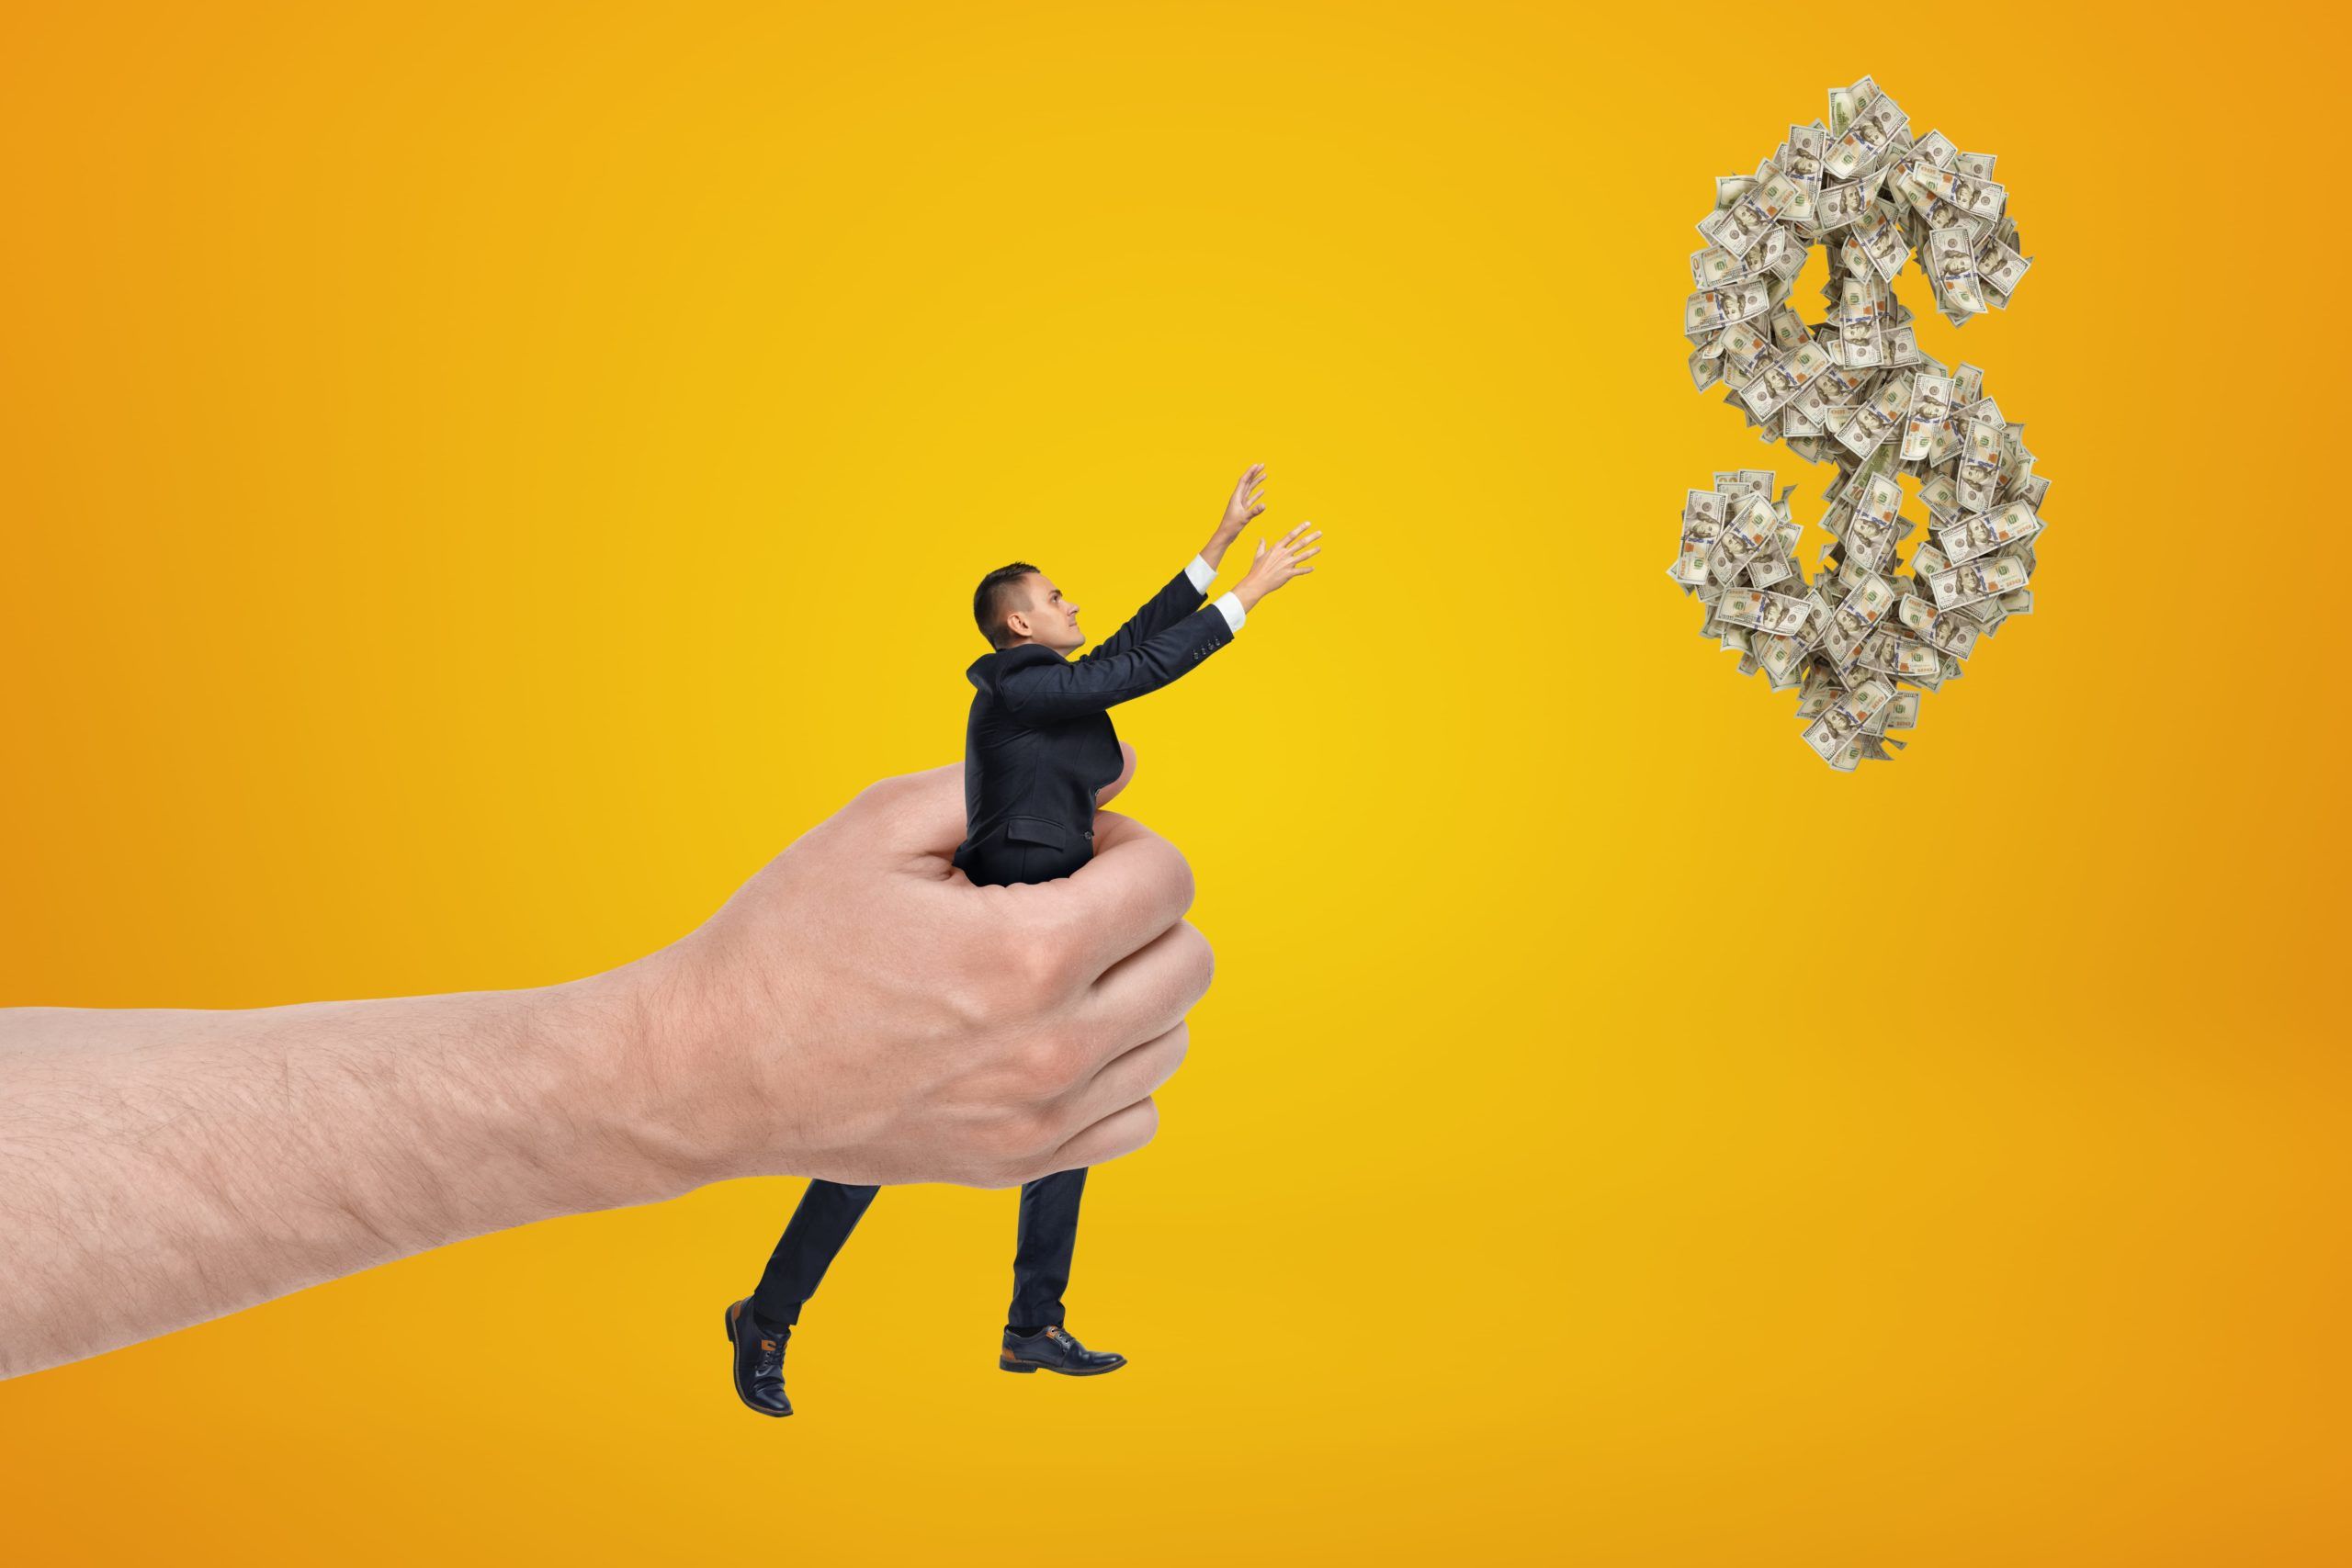 Big hand holding small businessman reaching out with his both hands for dollar symbol made up of dollar bills and floating in air on amber background.